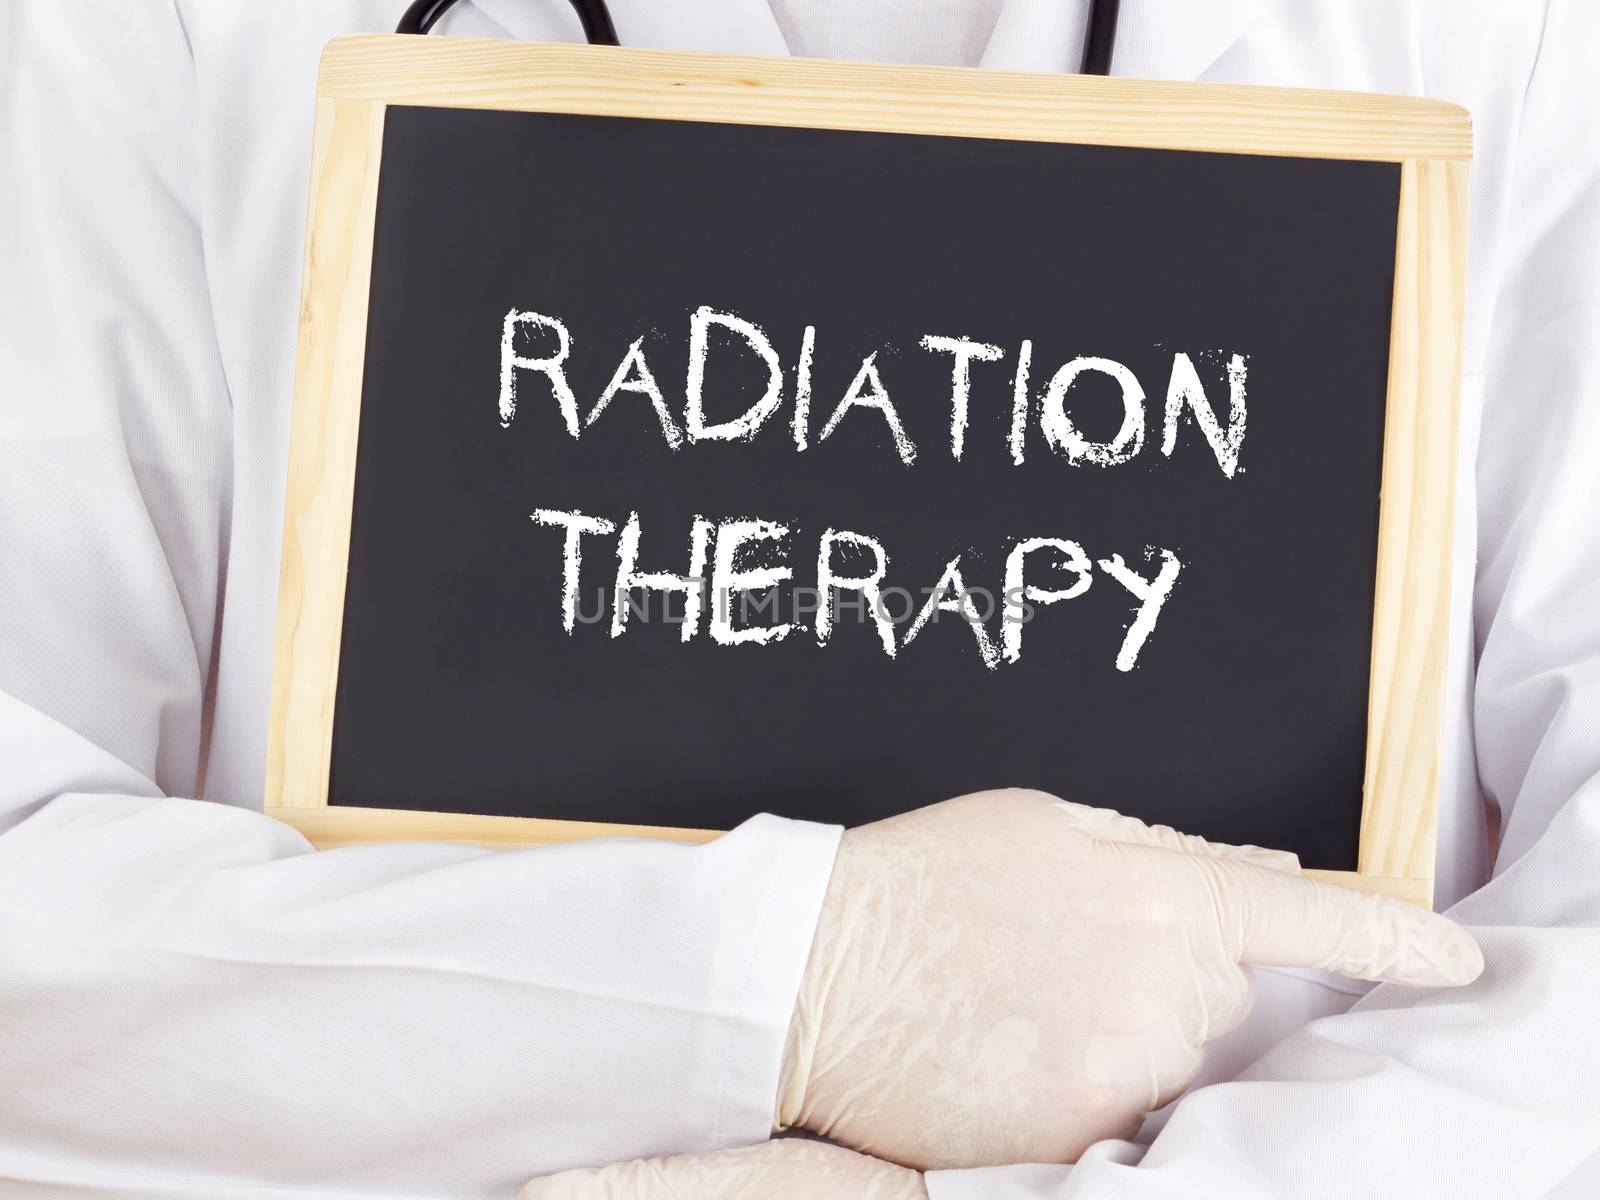 Doctor shows information: radiation therapy